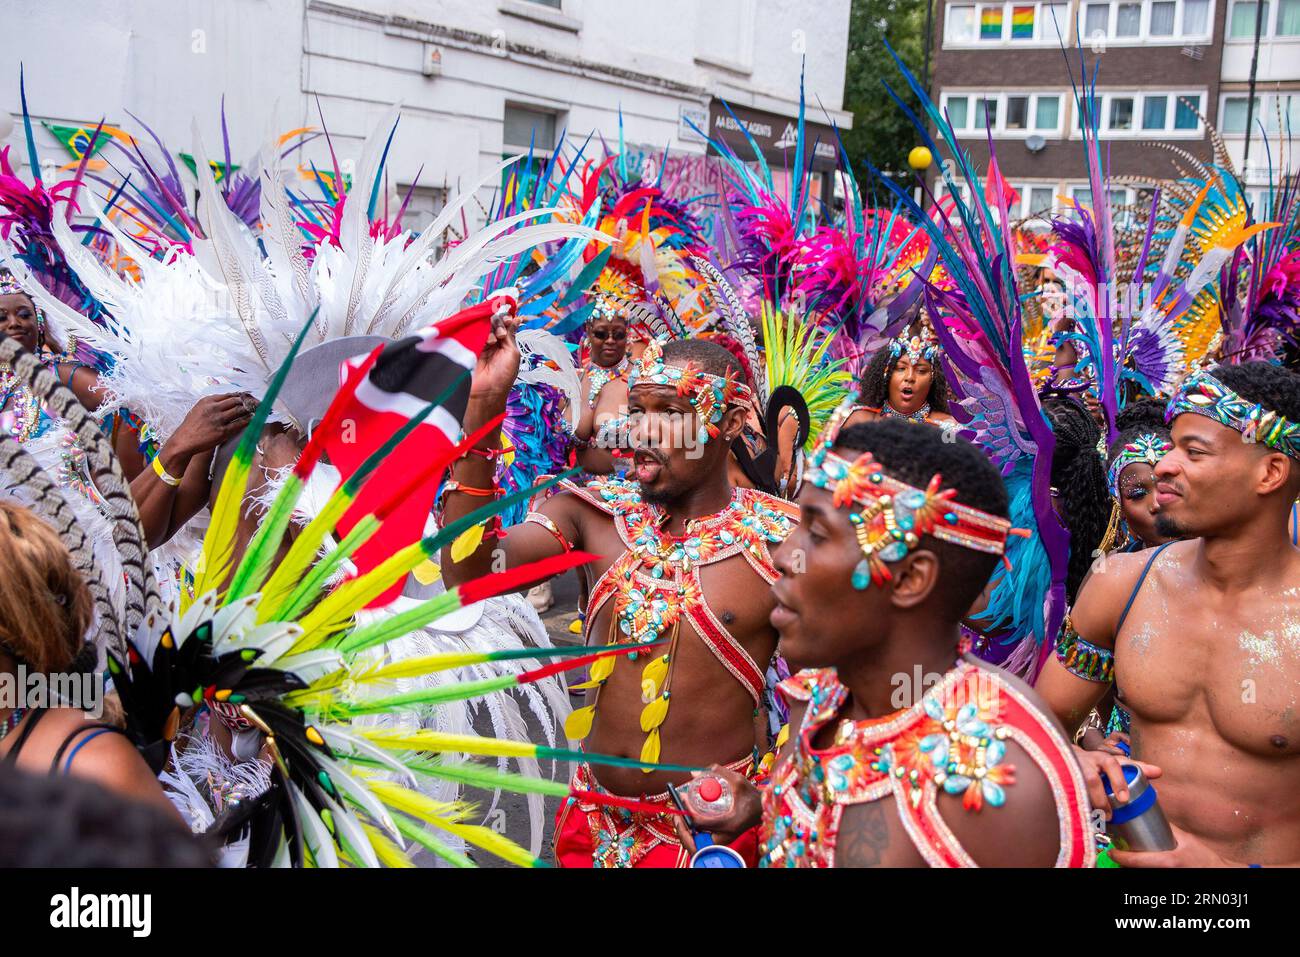 London, UK. 28th Aug, 2023. The colorful crowd is dancing, singing and walking on the parade of the Notting Hill Carnival in London. The Notting Hill Carnival is one of the biggest street festivals in the world. It started in 1966 but originated with the Caribbean Carnival organised in 1959 with the immigrant community from Trinidad and Tobago. This year the Notting Hill Carnival marks the 50th anniversary of the introduction of the sound systems and Mas bands. Also it marks the 75th anniversary of the arrival of the passengers of the Empire Windrush to the UK. (Credit Image: © Kr Stock Photo